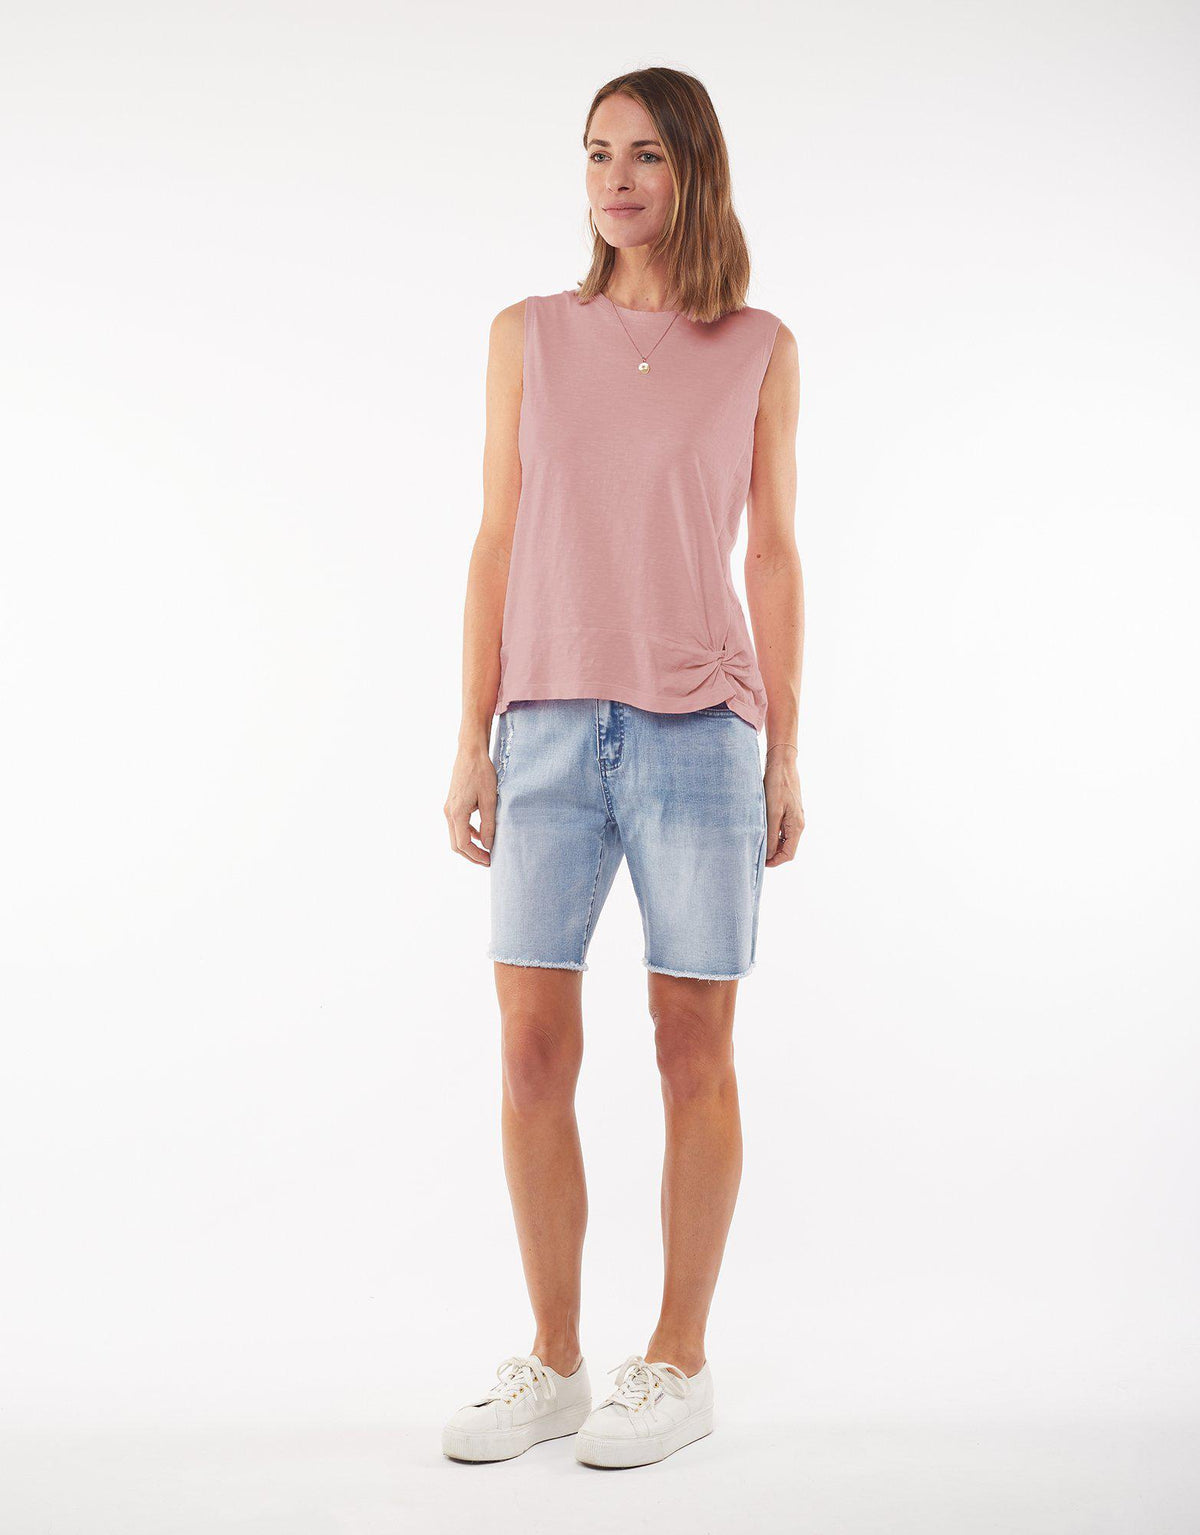 Knot Front Crop Tank - Pink - Foxwood - FUDGE Gifts Home Lifestyle